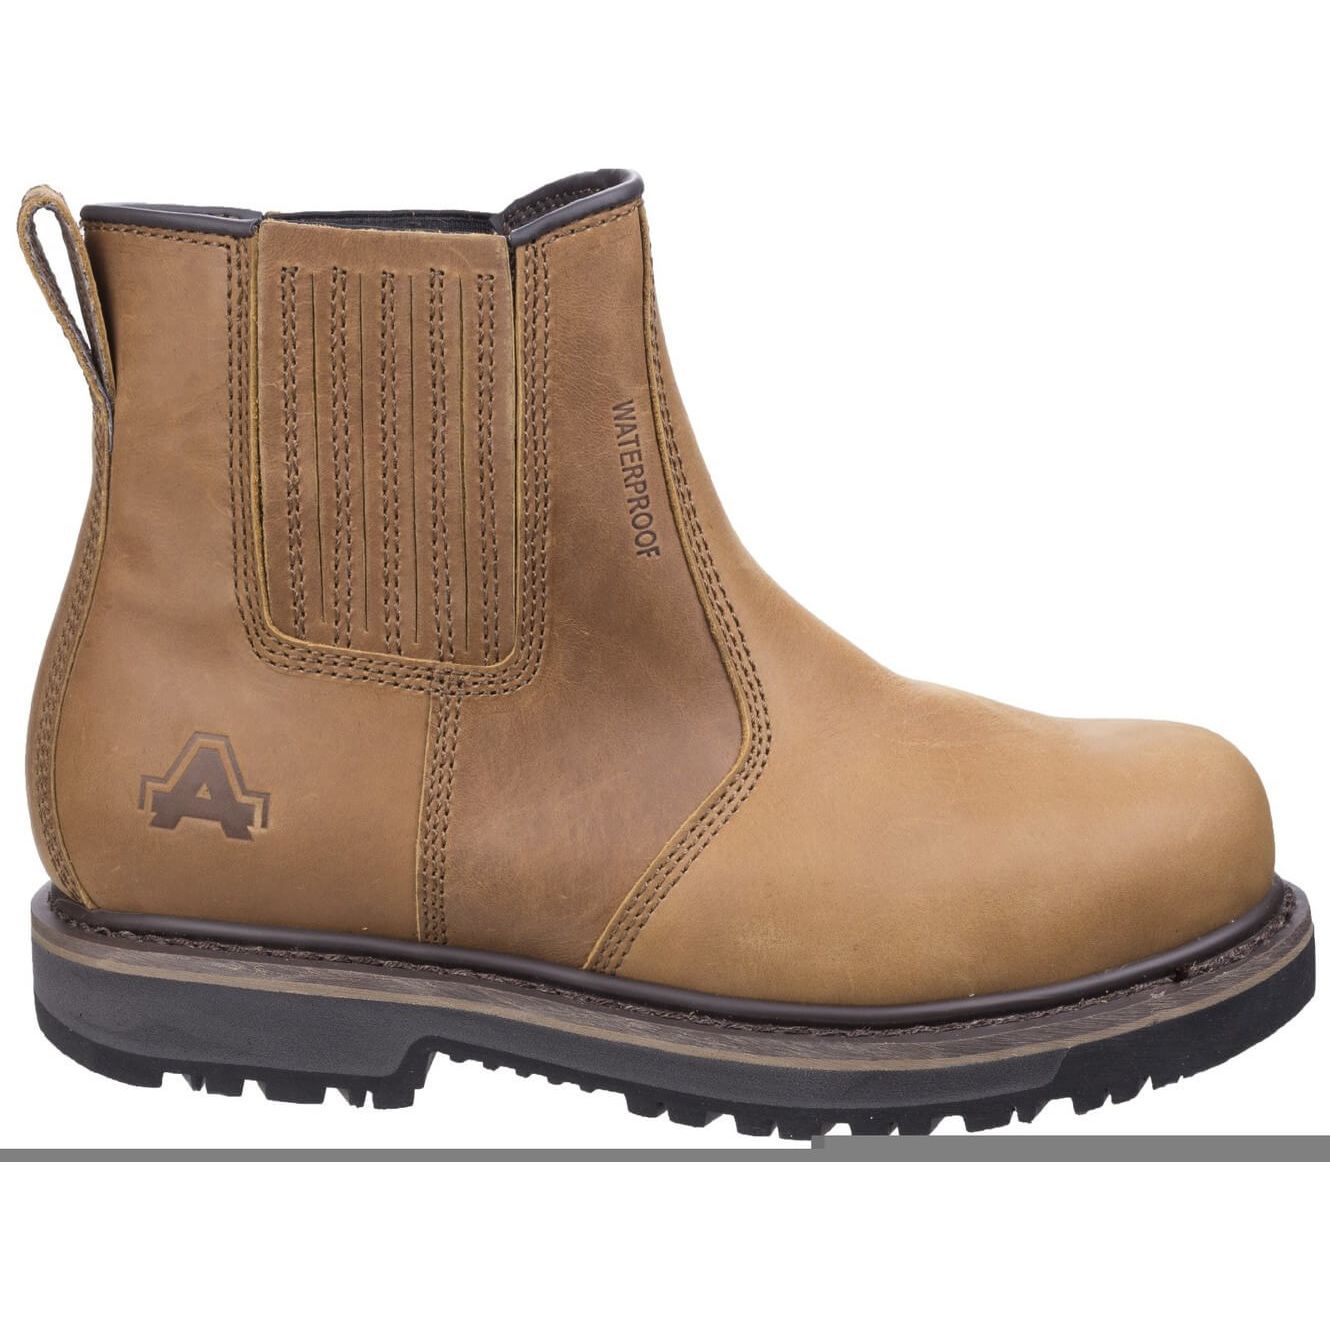 Amblers As232 Safety Boots - Mens - Sale